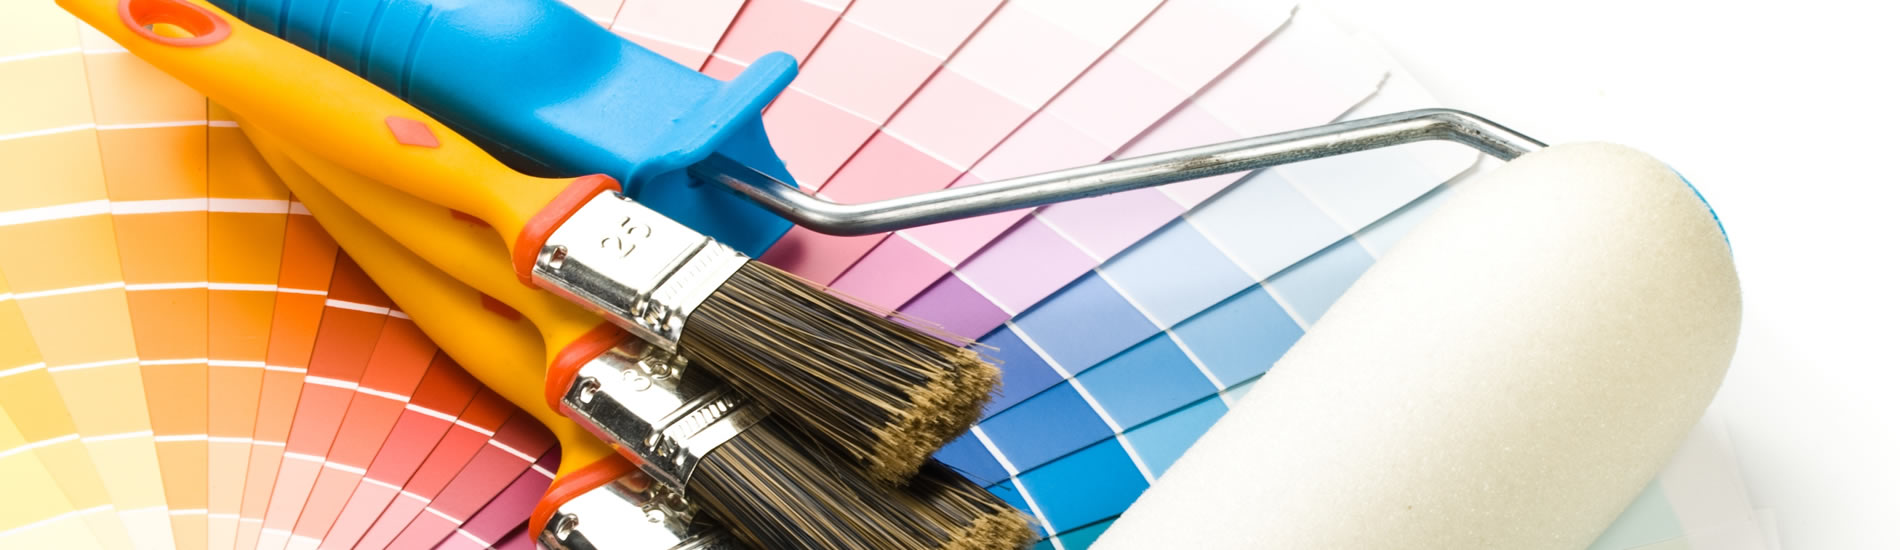 Why hire professional commercial painters